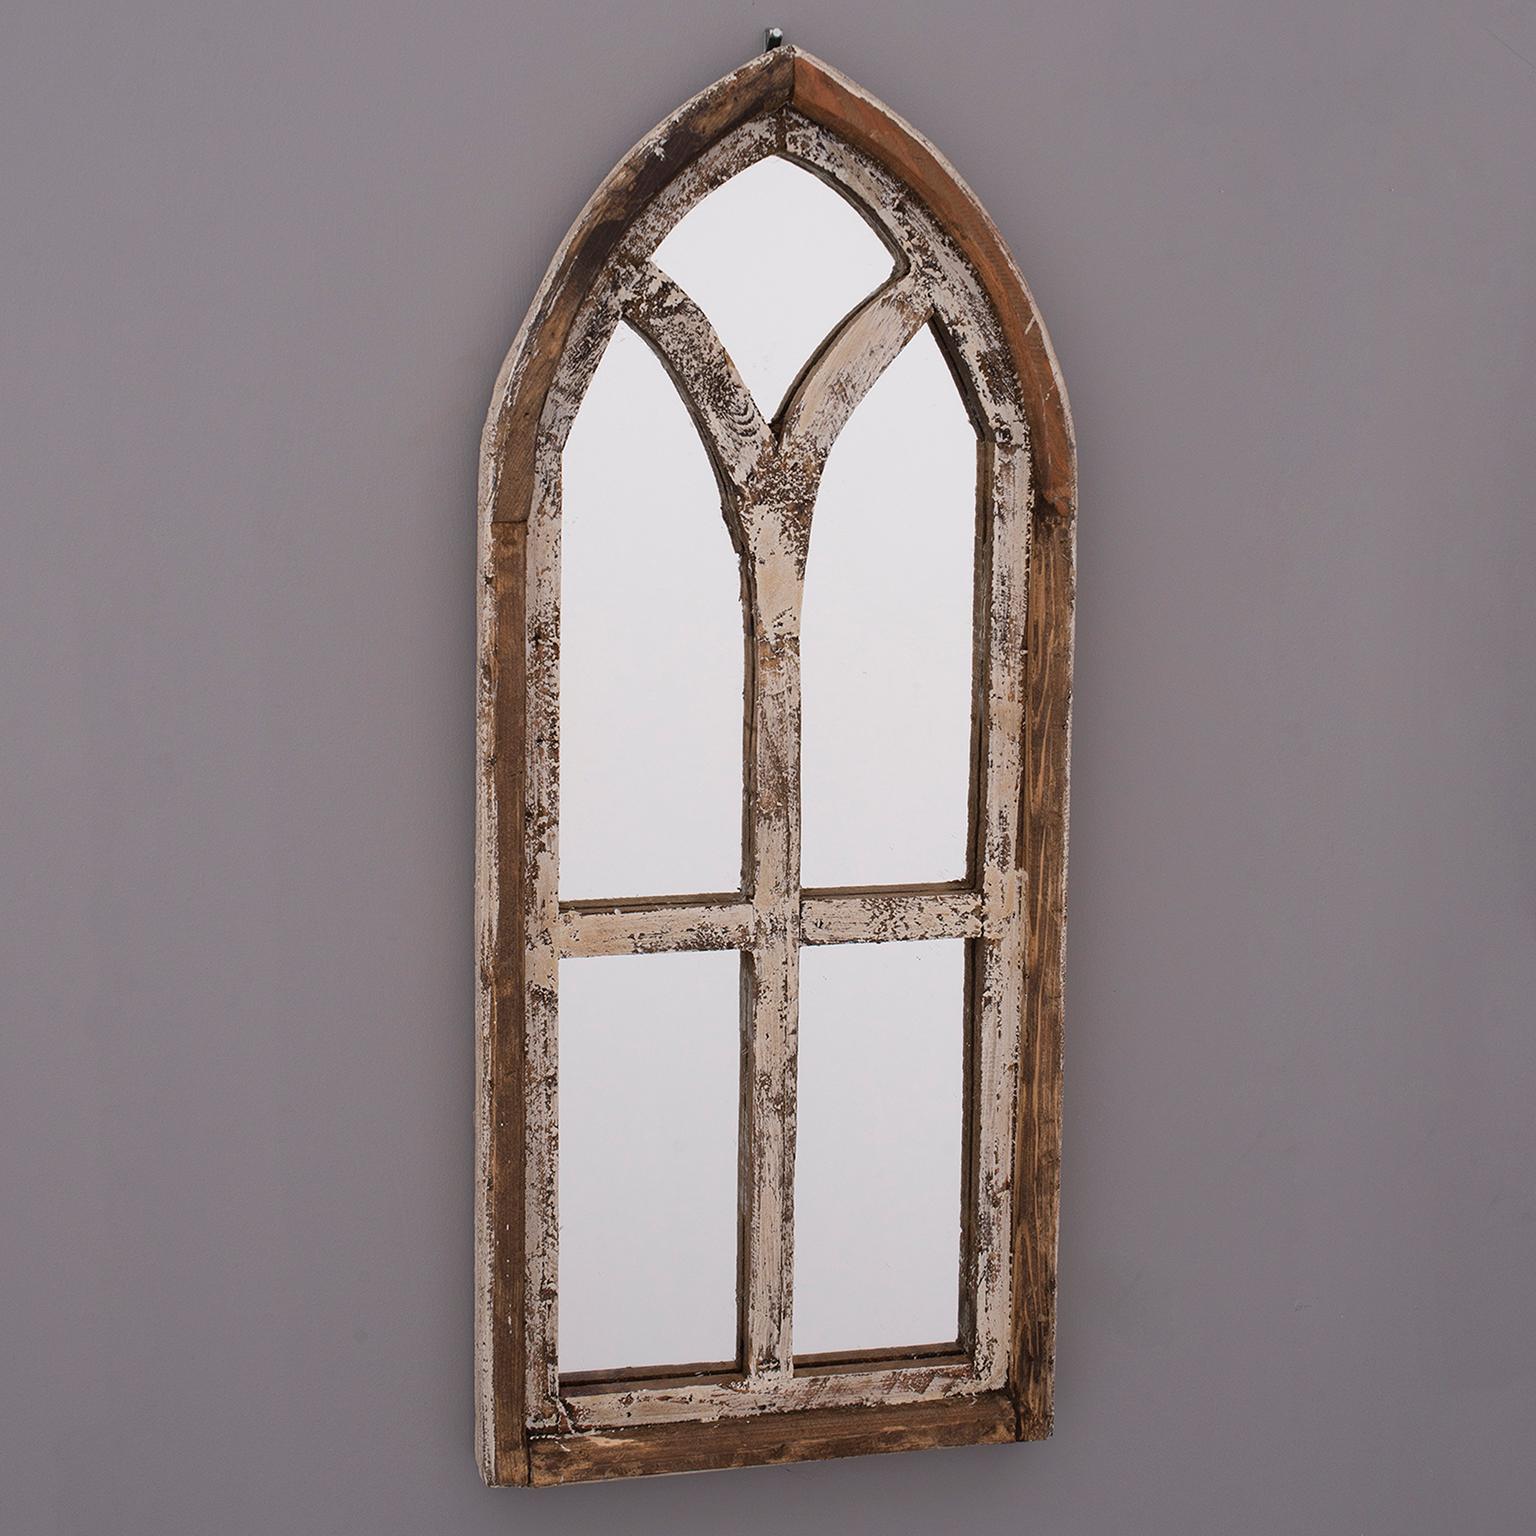 arched wooden window frames